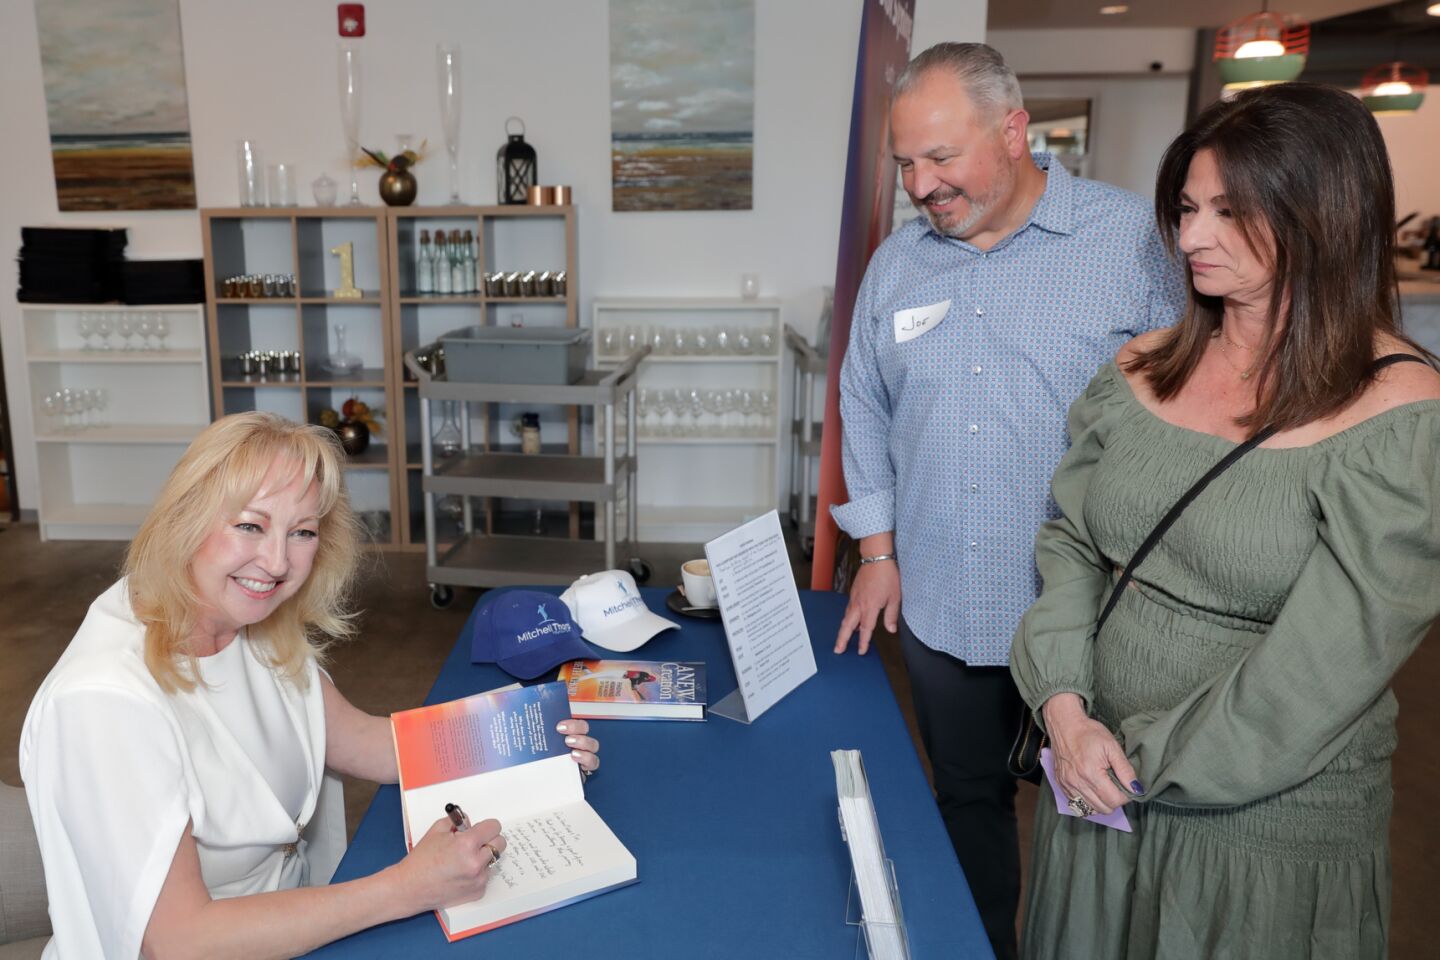 Beth Thorp signs a book for Joe and AnnMarie Gabaldon